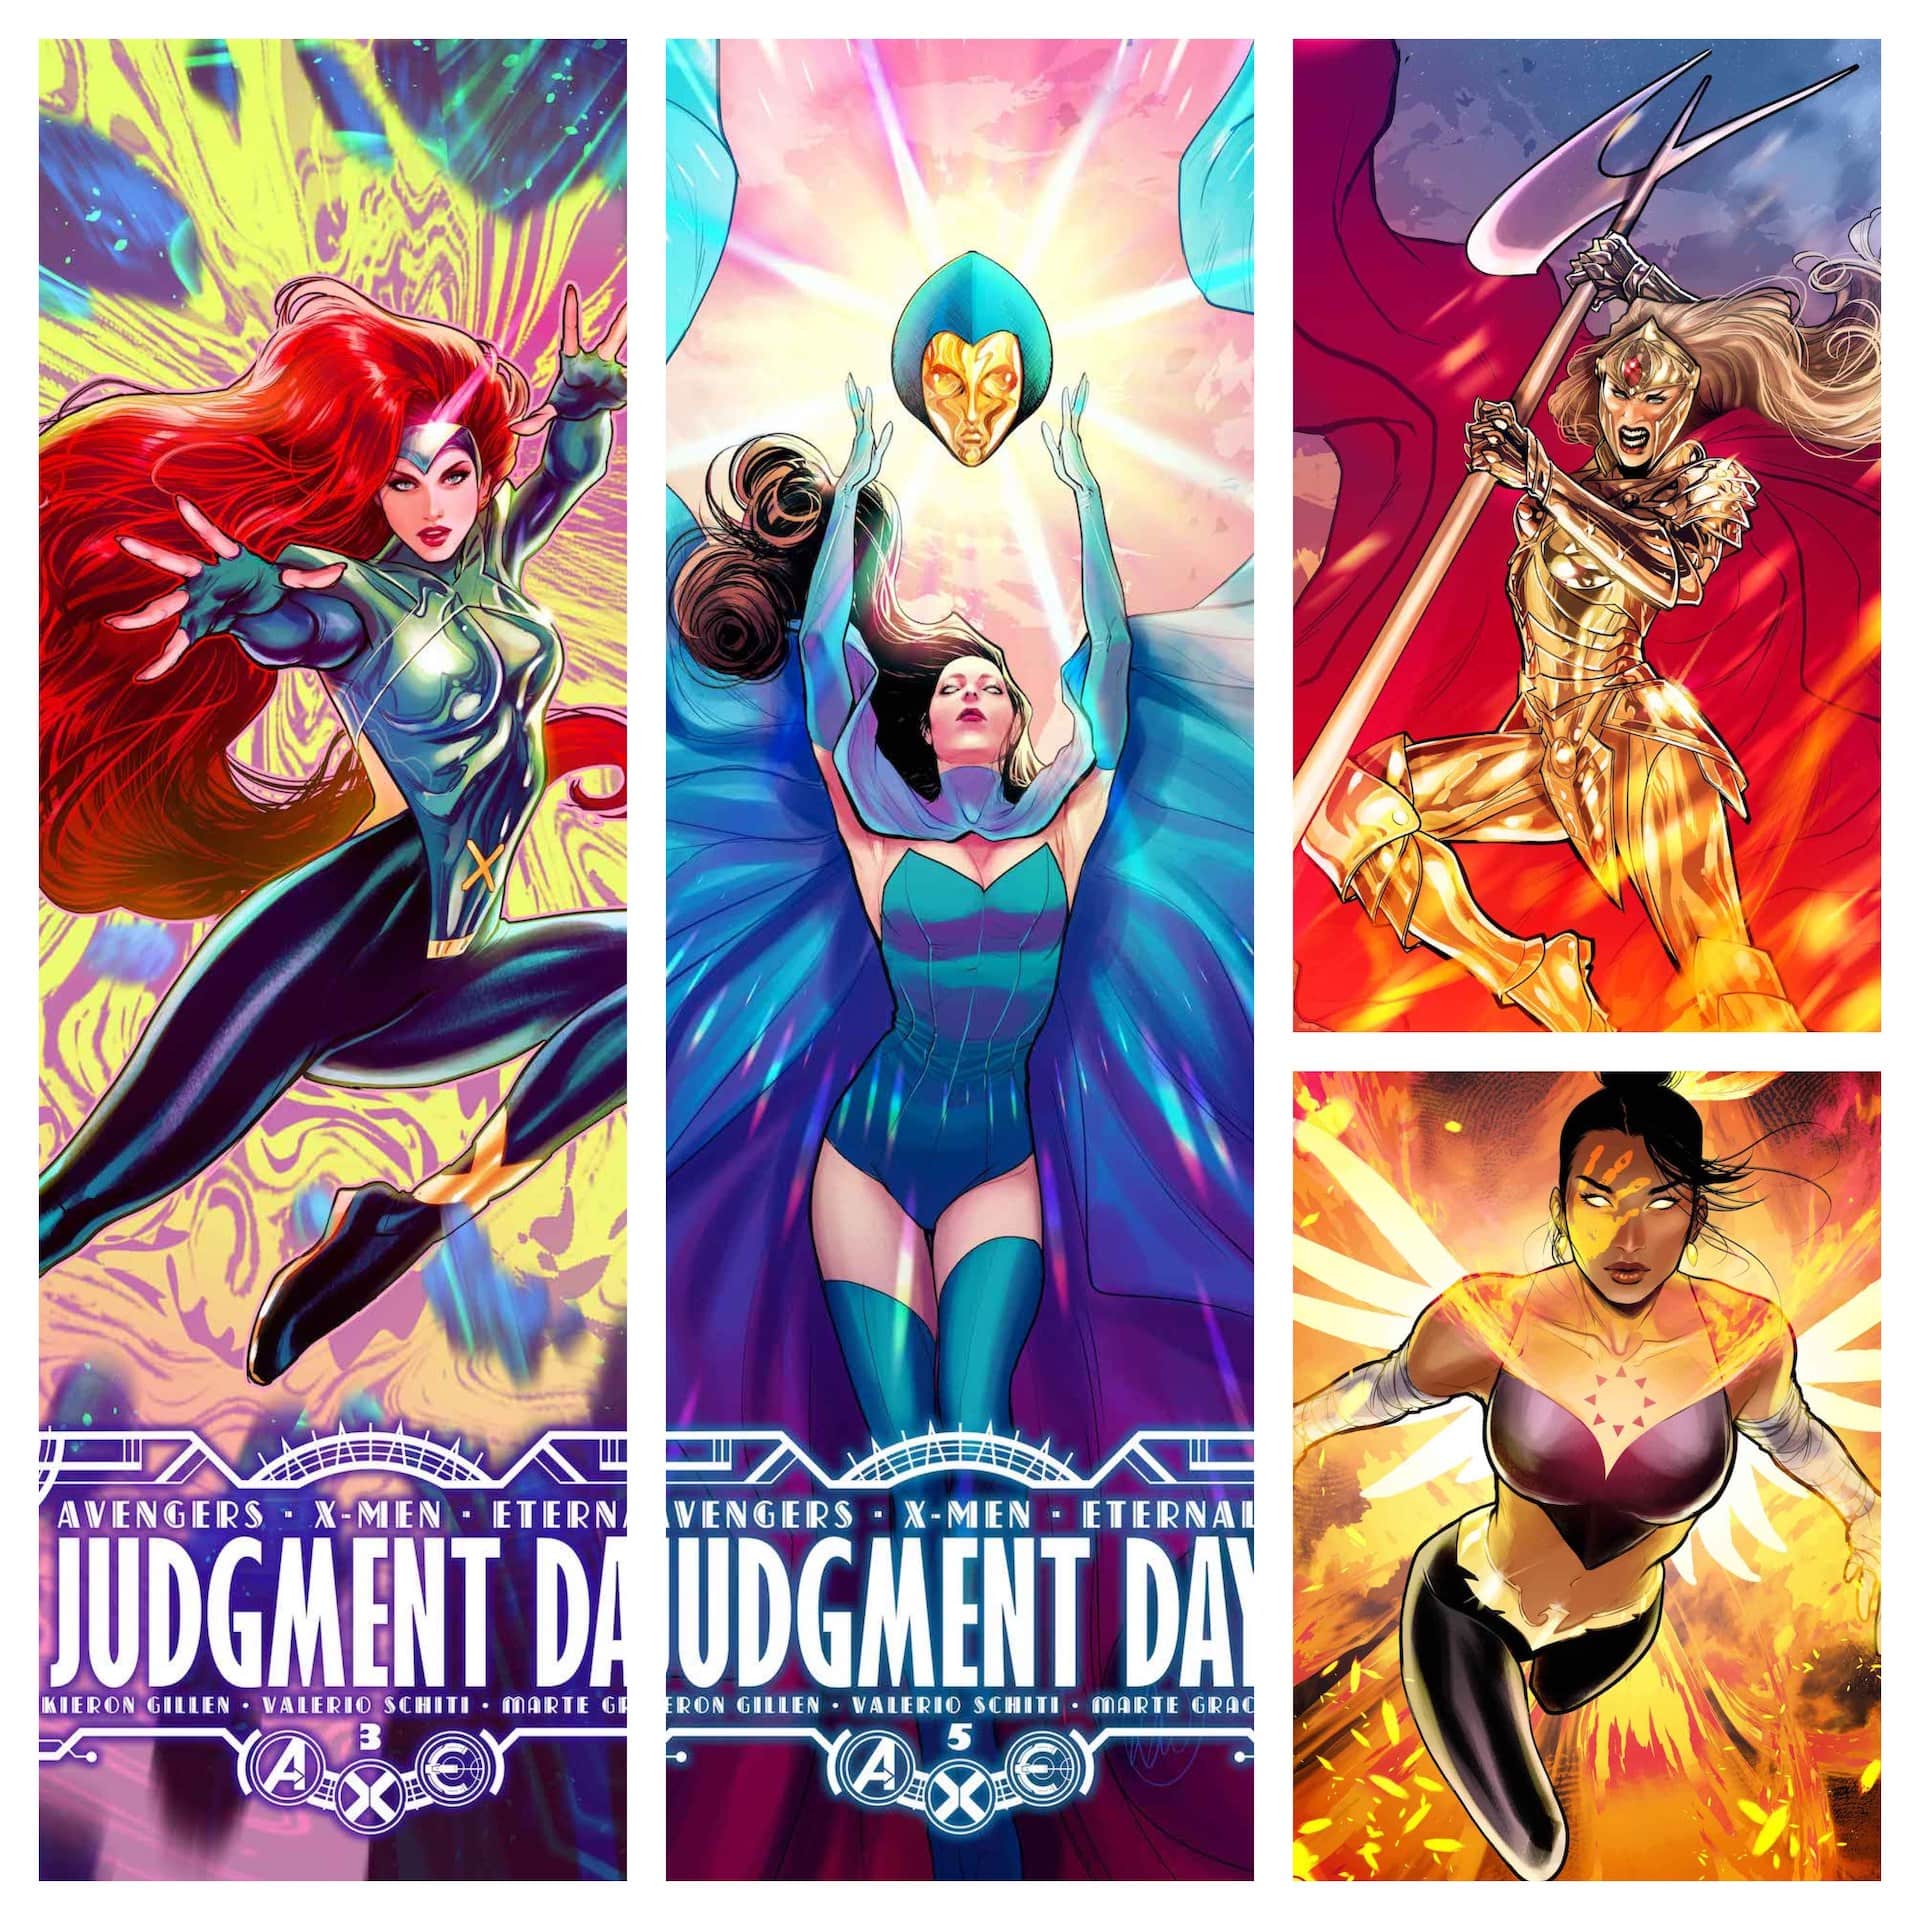 Lucas Werneck 'A.X.E.: Judgment Day' covers get fierce